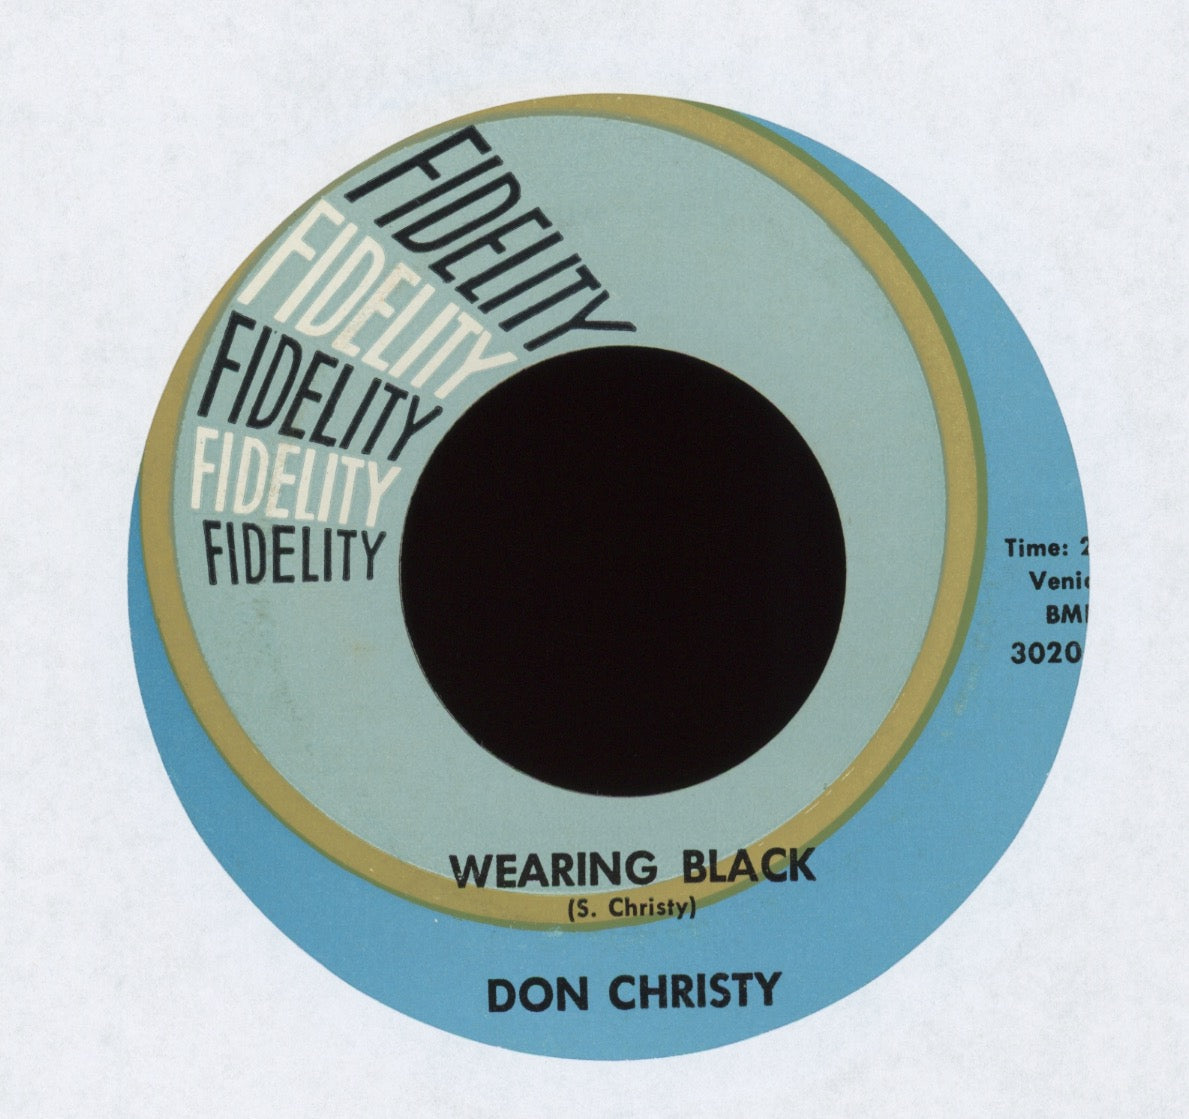 Don Christy - Don't Have To Tell Me on Fidelity